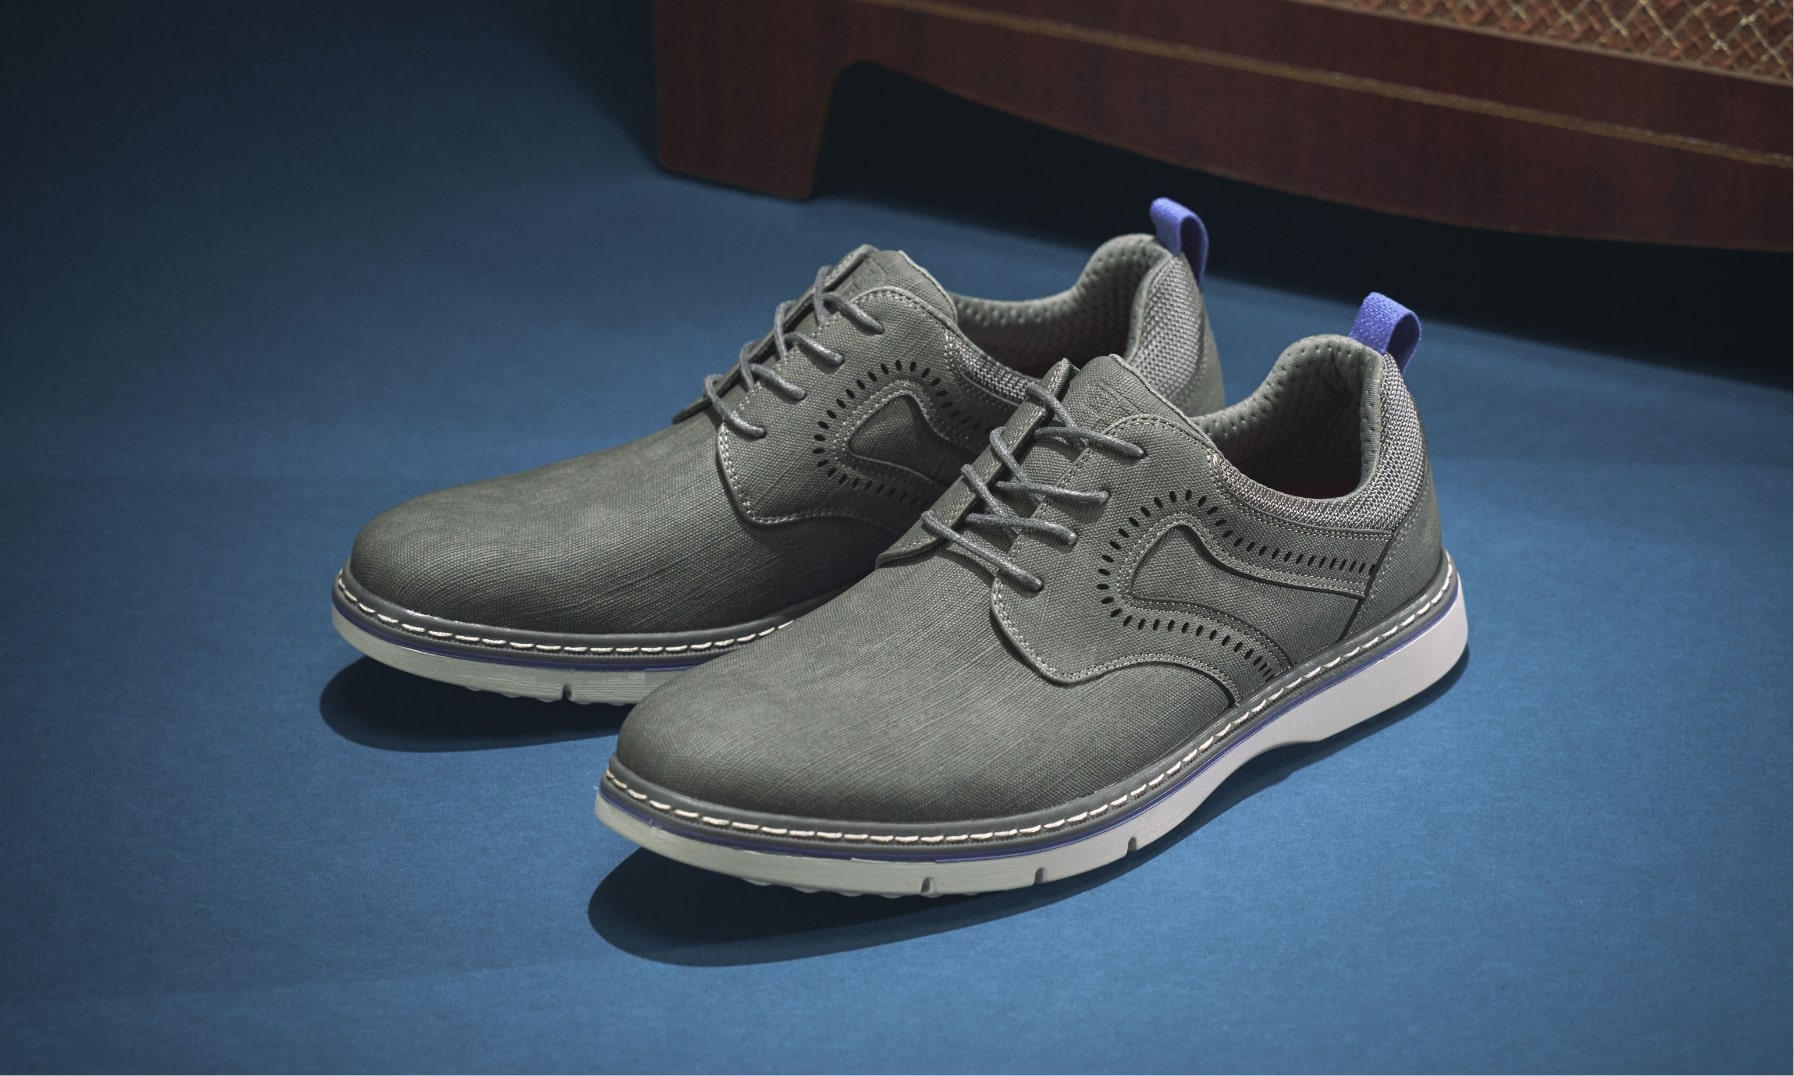 Click to shop Stacy Adams casuals. Image features the Stride in grey.